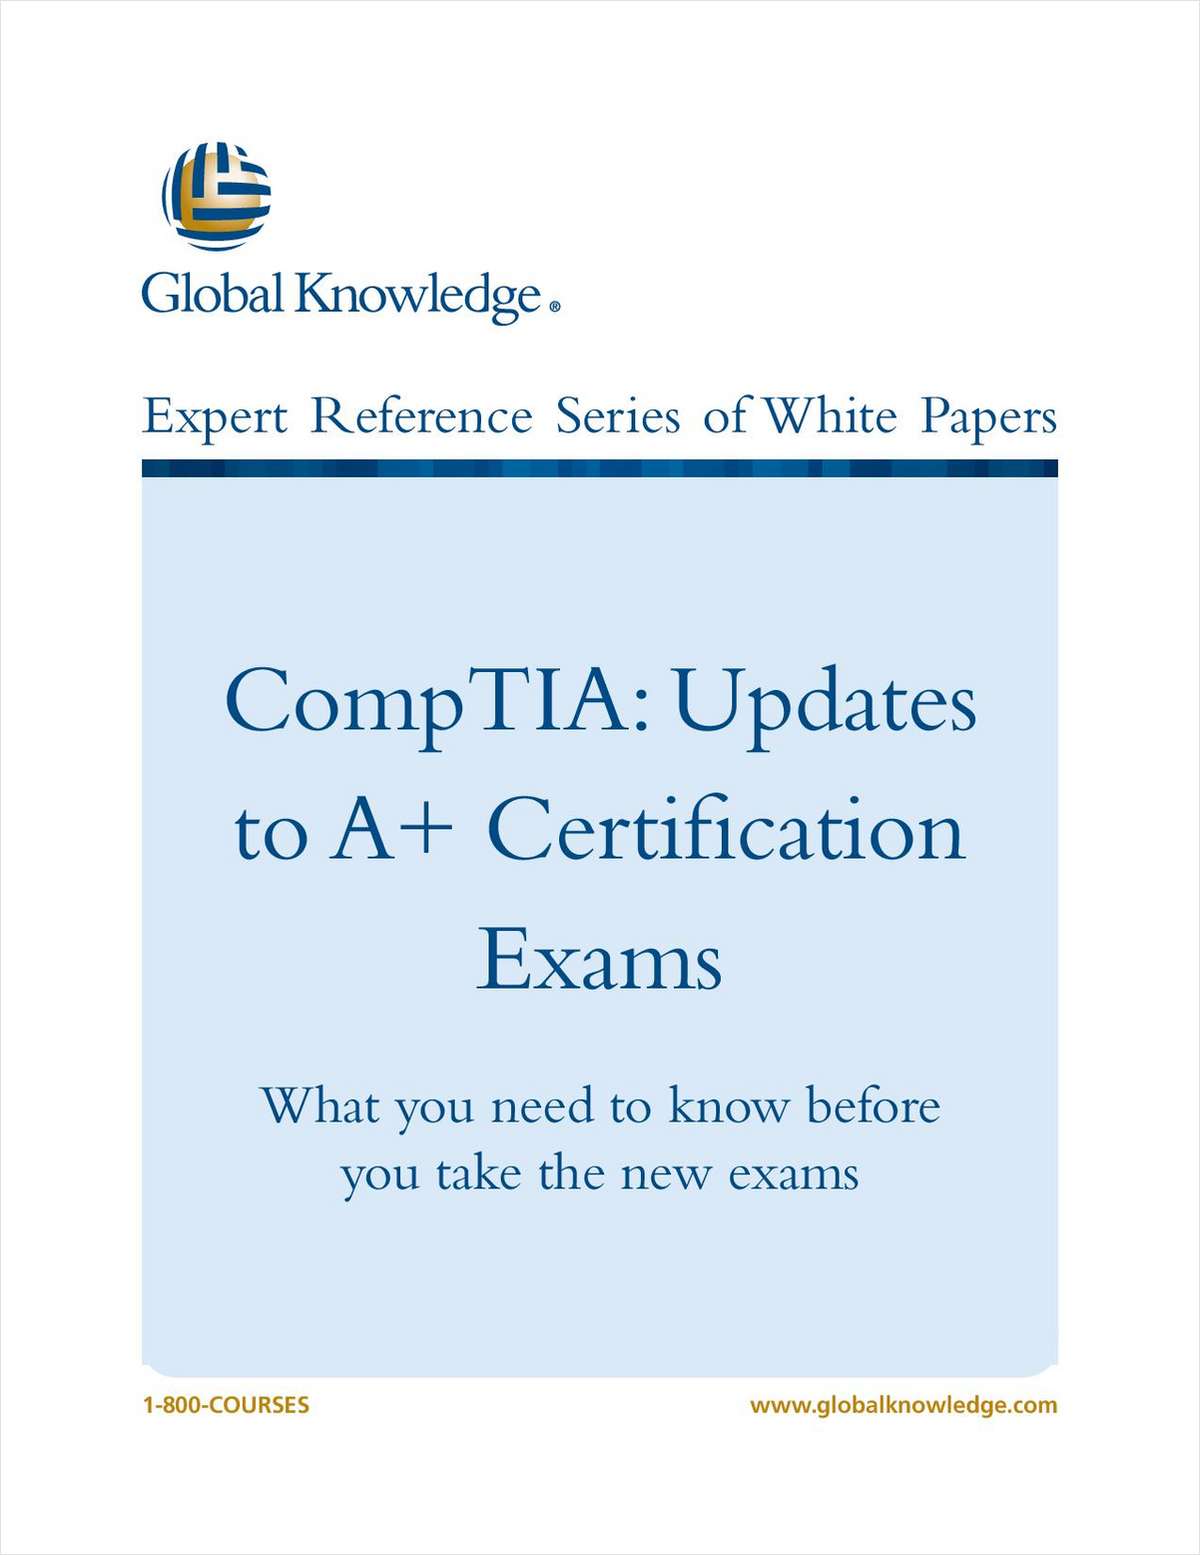 CompTIA: Updates to A+ Certification Exams